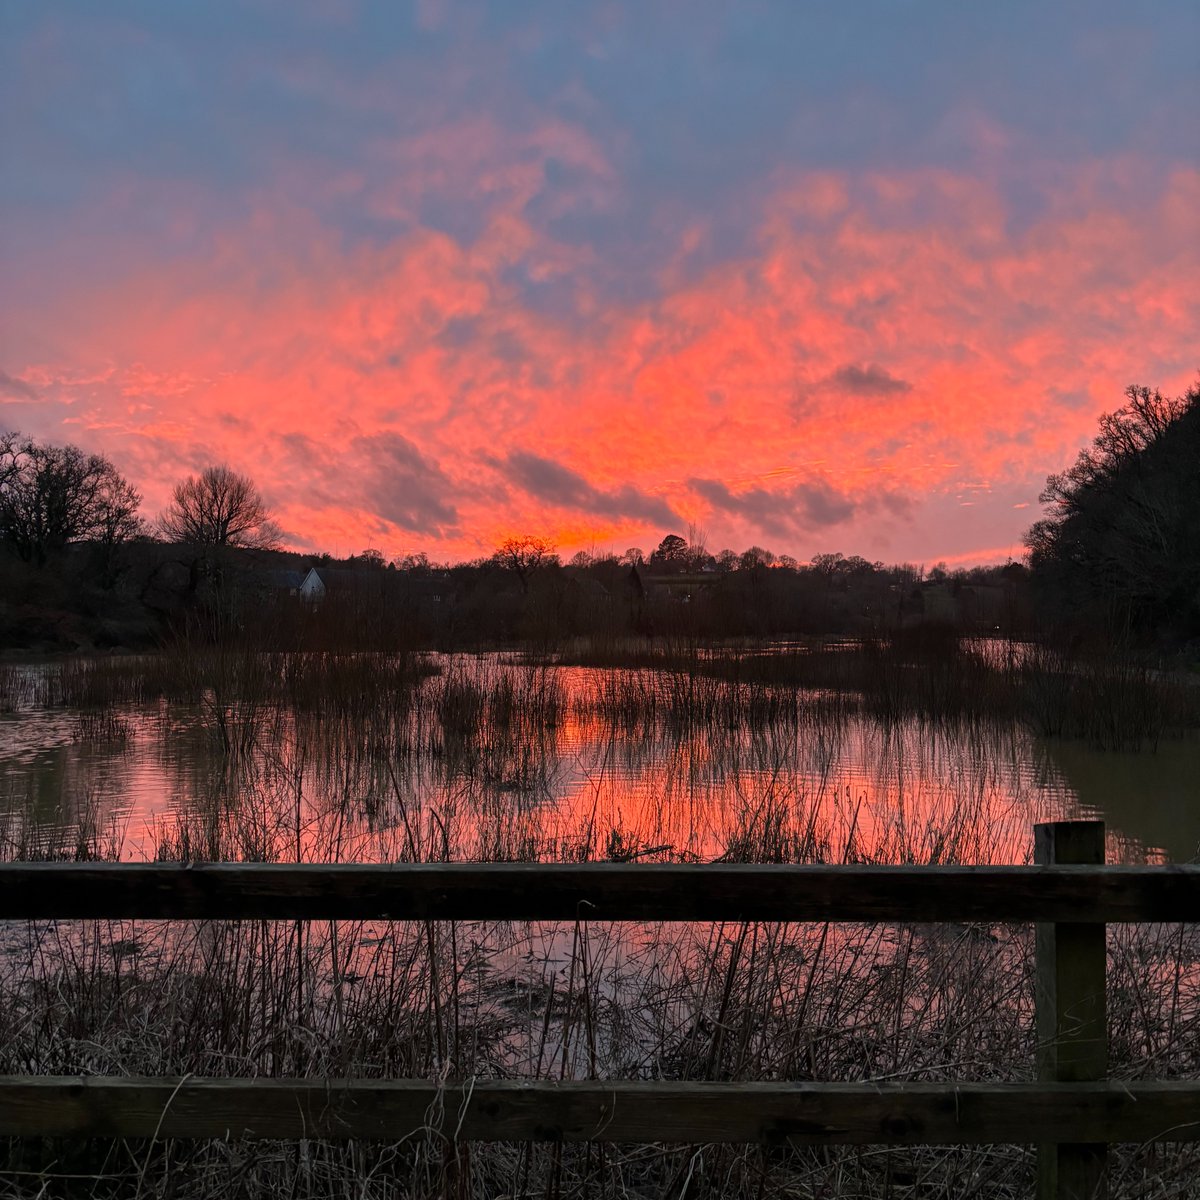 A fiery sky reflected in the water at Queens Marsh last night. The marsh is by the accessible to all footpath that leads from Totnes to @DartingtonTrust. It's a great place to spot birds, with heron, geese and even kingfishers putting in a regular appearance. #sunset #devonwalks